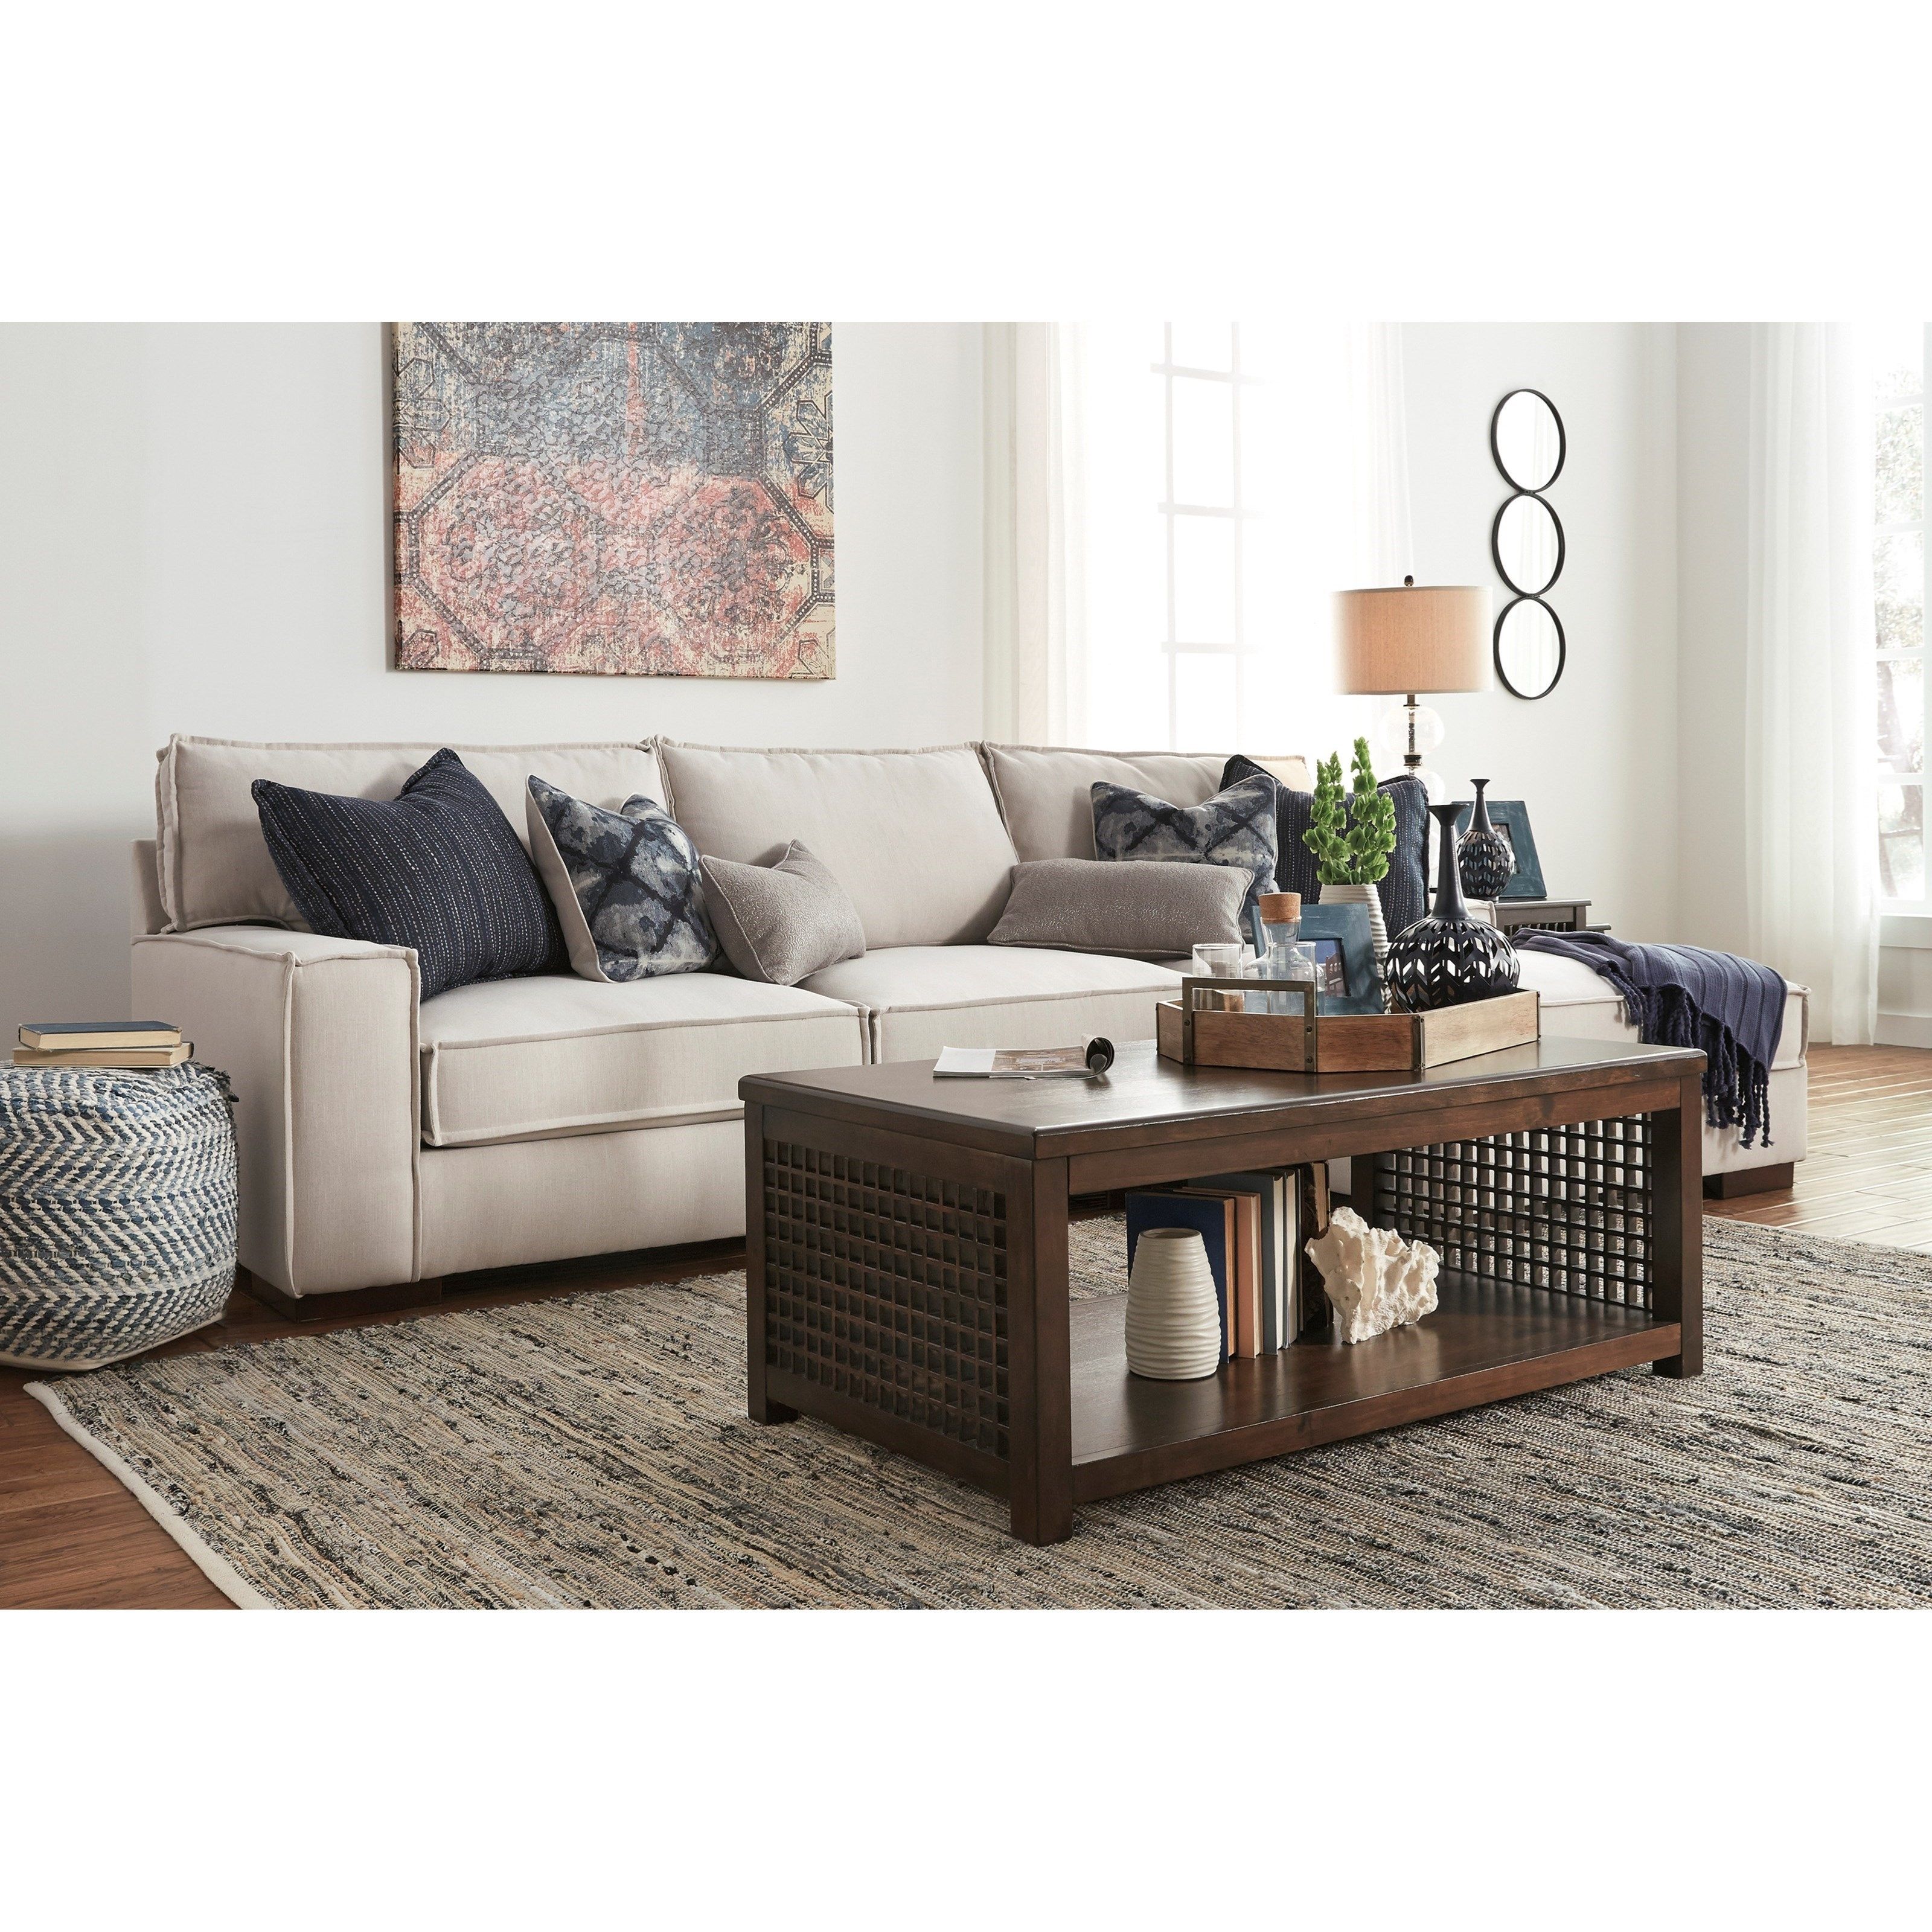 Raf Chaise Laf Sofa | Baci Living Room Intended For Mcdade Graphite 2 Piece Sectionals With Laf Chaise (View 12 of 25)